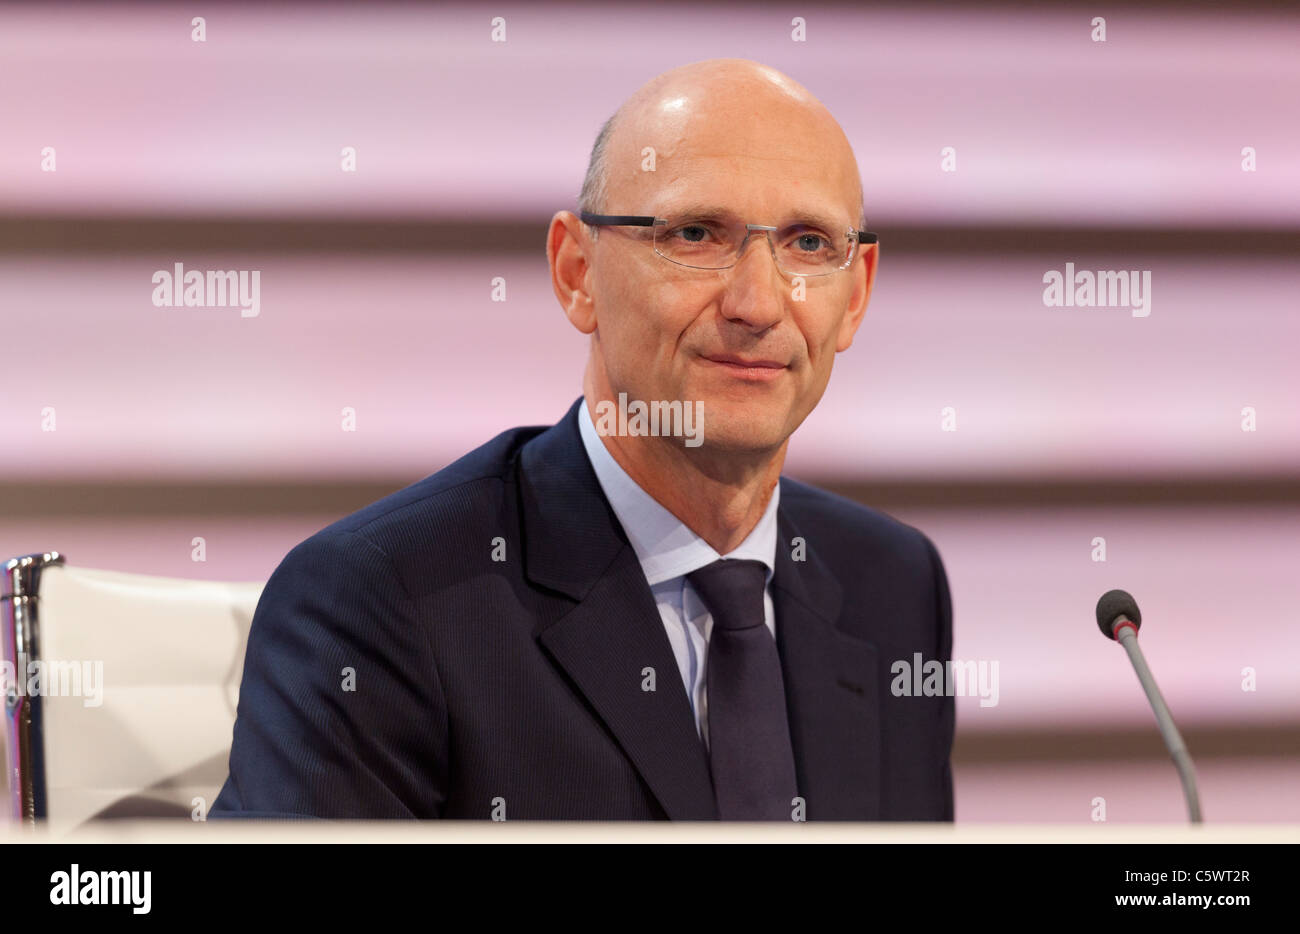 Deutsche Telekom Cfo Timotheus Hoettges High Resolution Stock Photography  and Images - Alamy